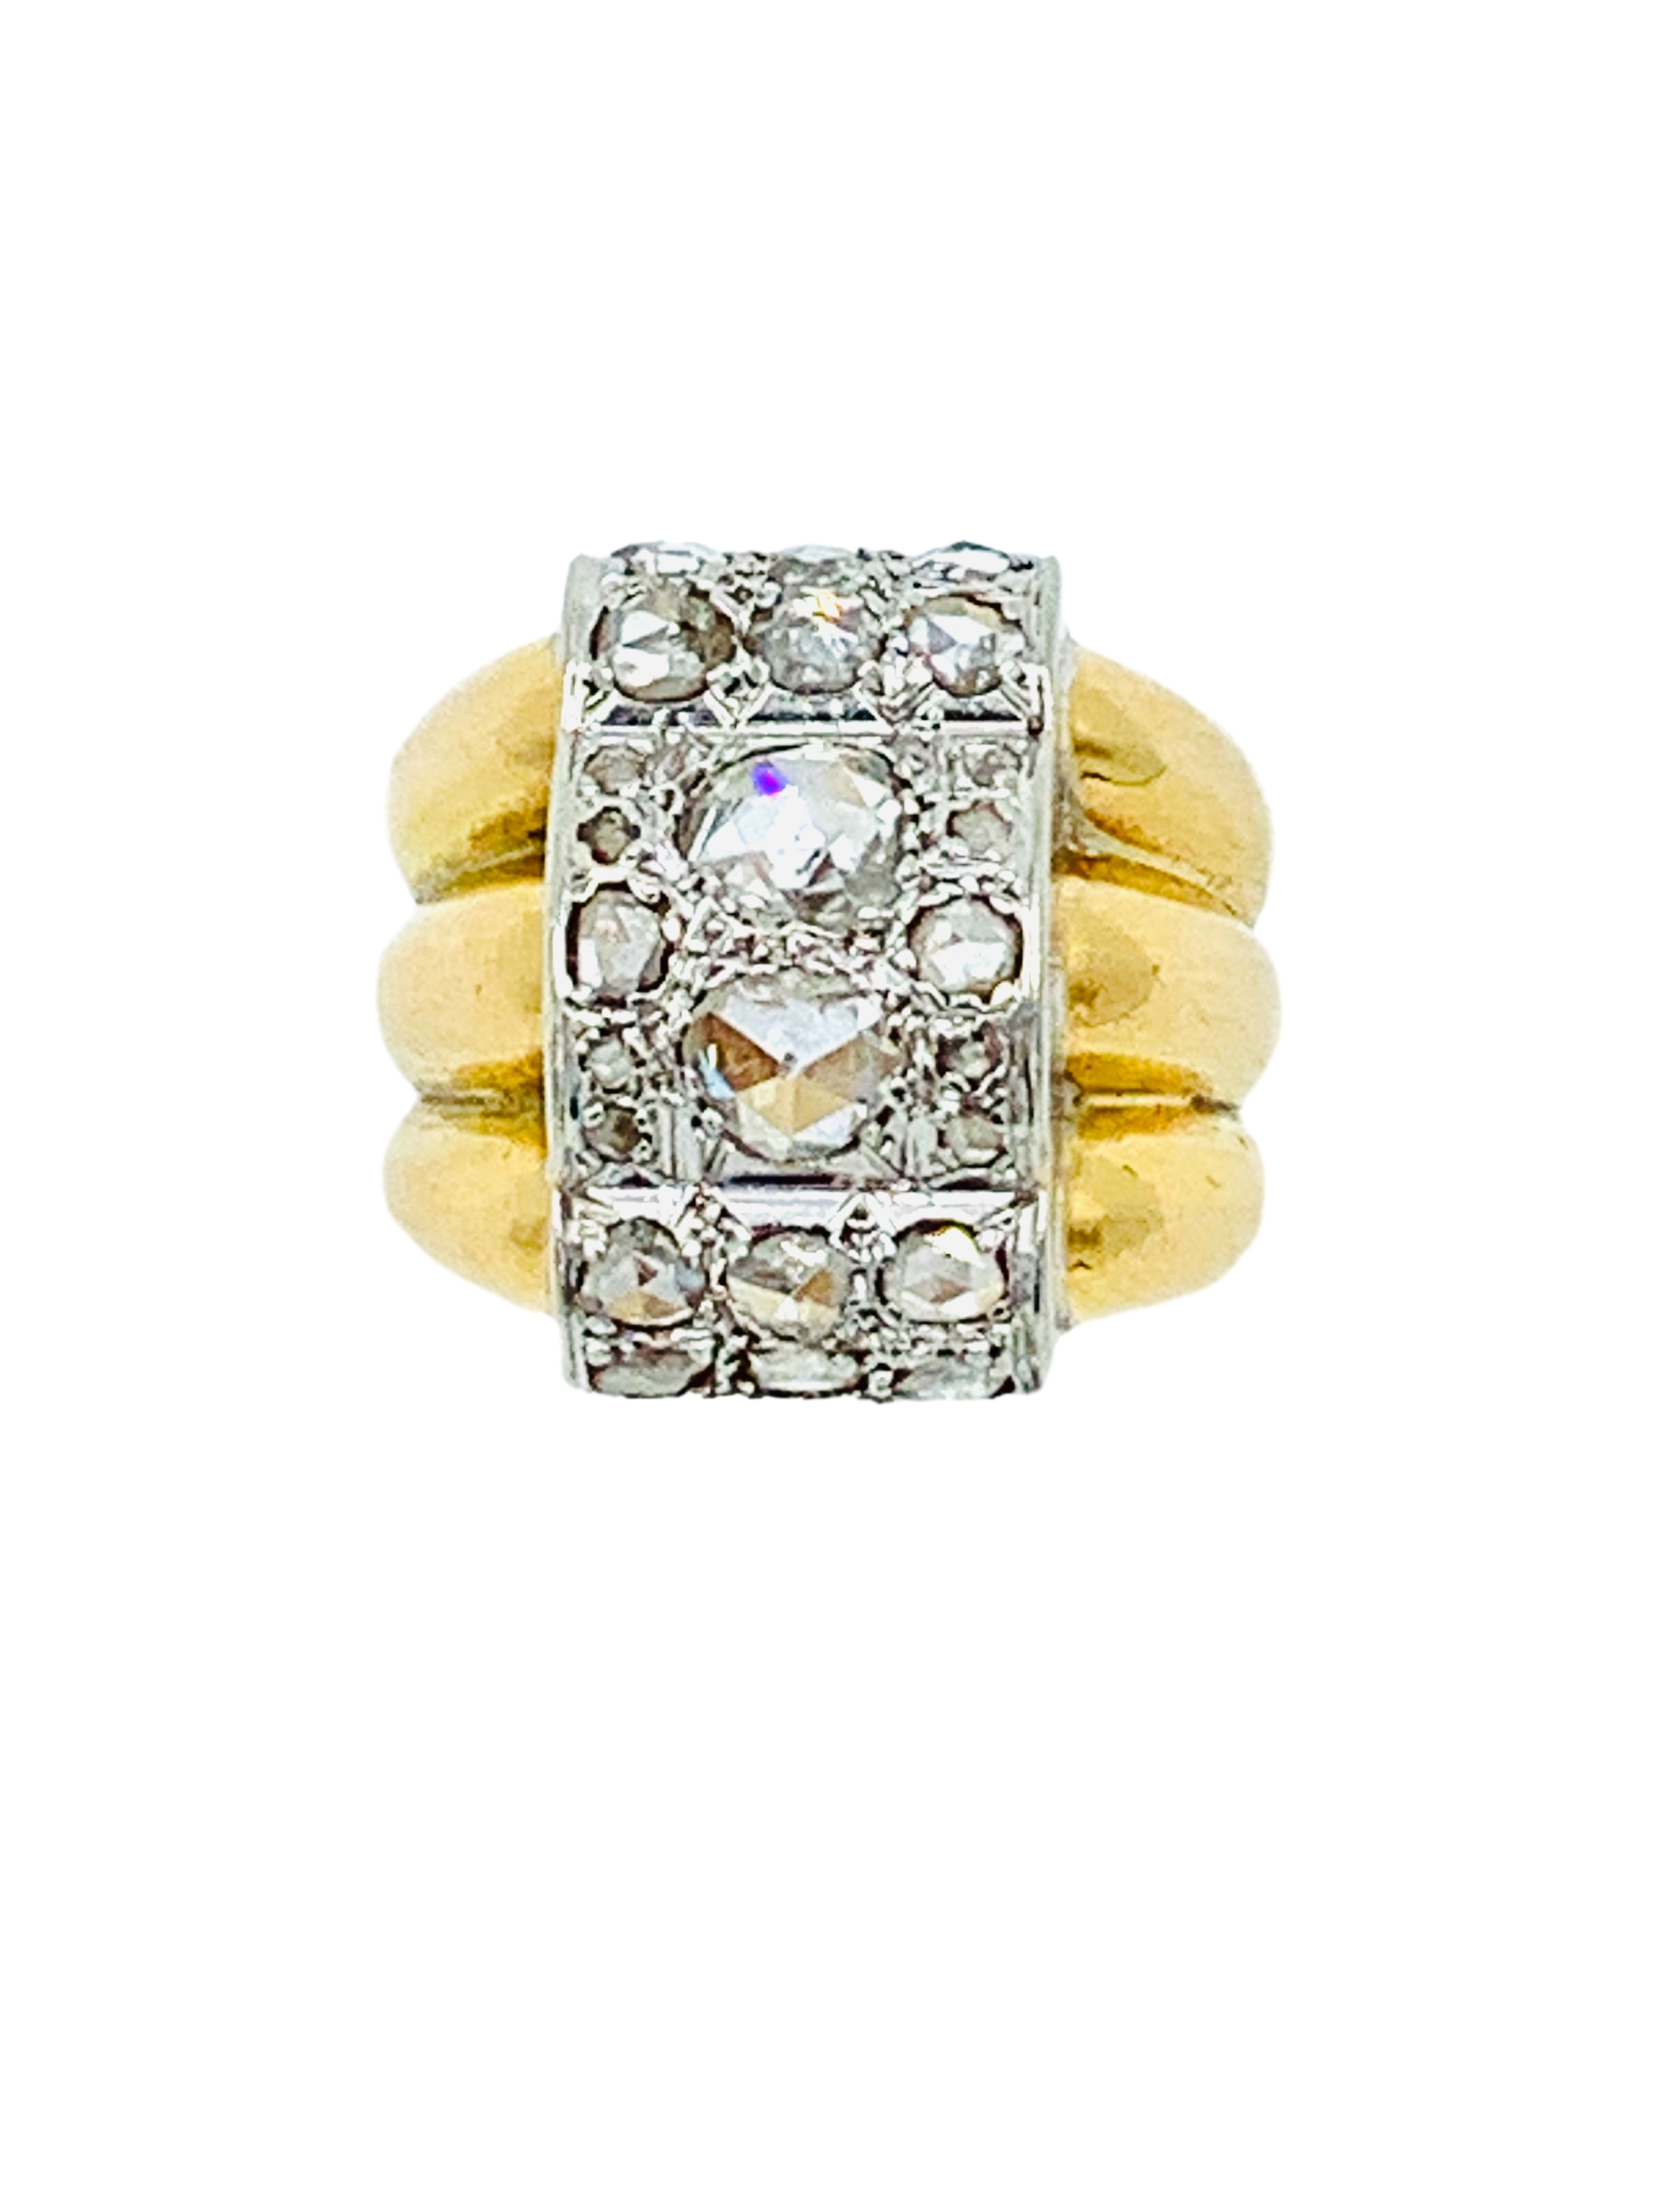 18ct yellow and white gold and diamond triple ring. - Image 2 of 6